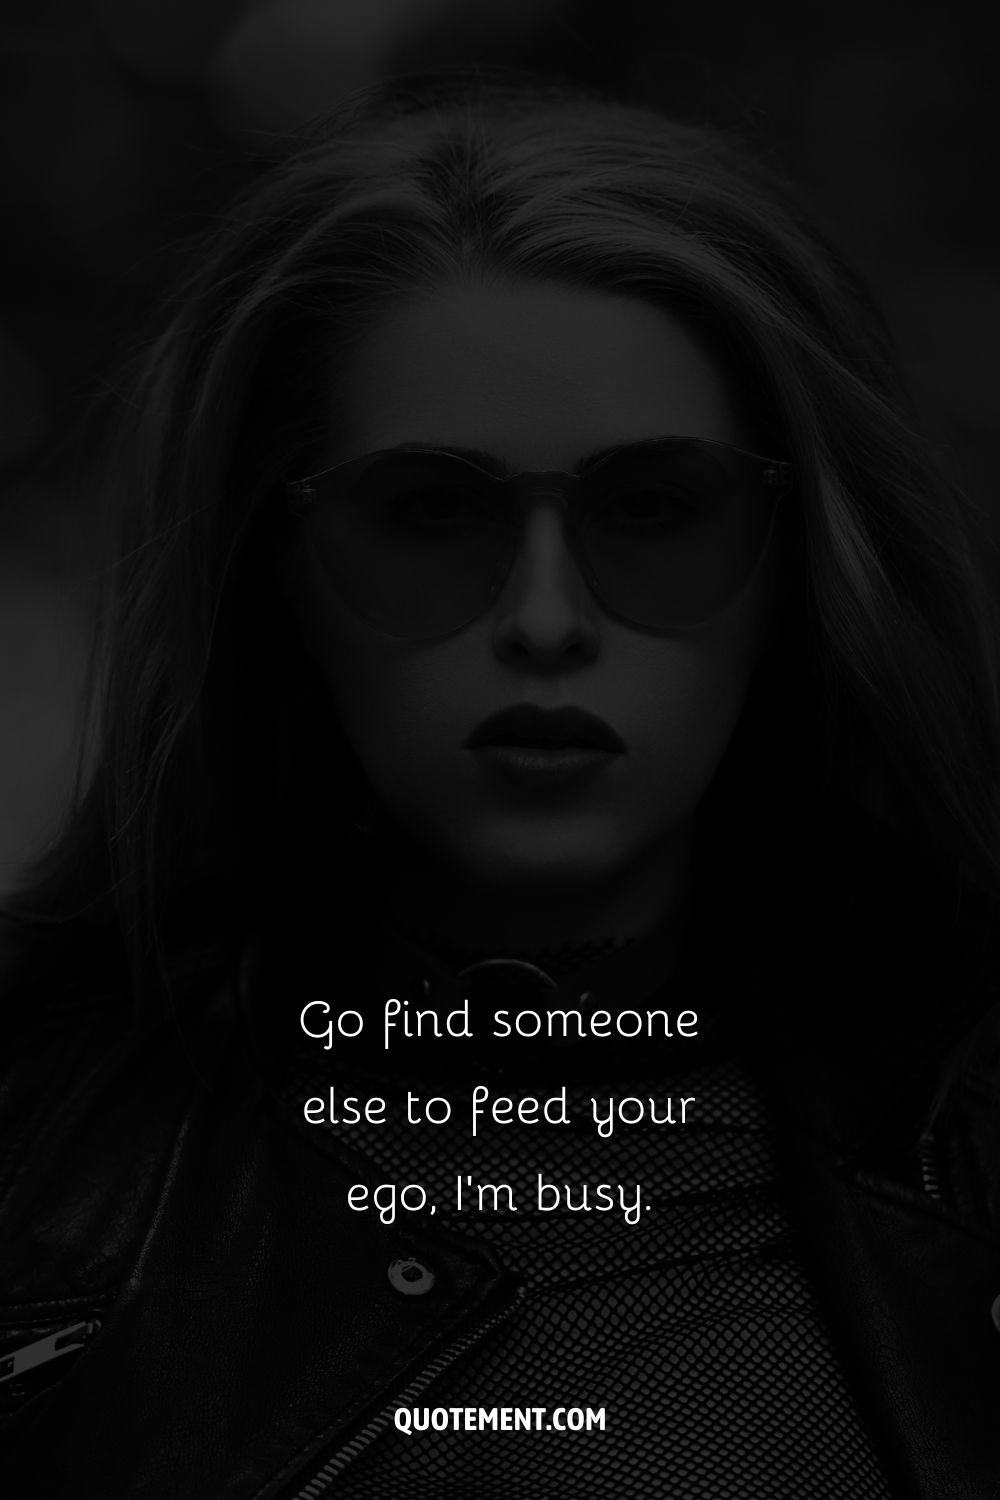 Image of a woman with sunglasses representing savage baddie caption.